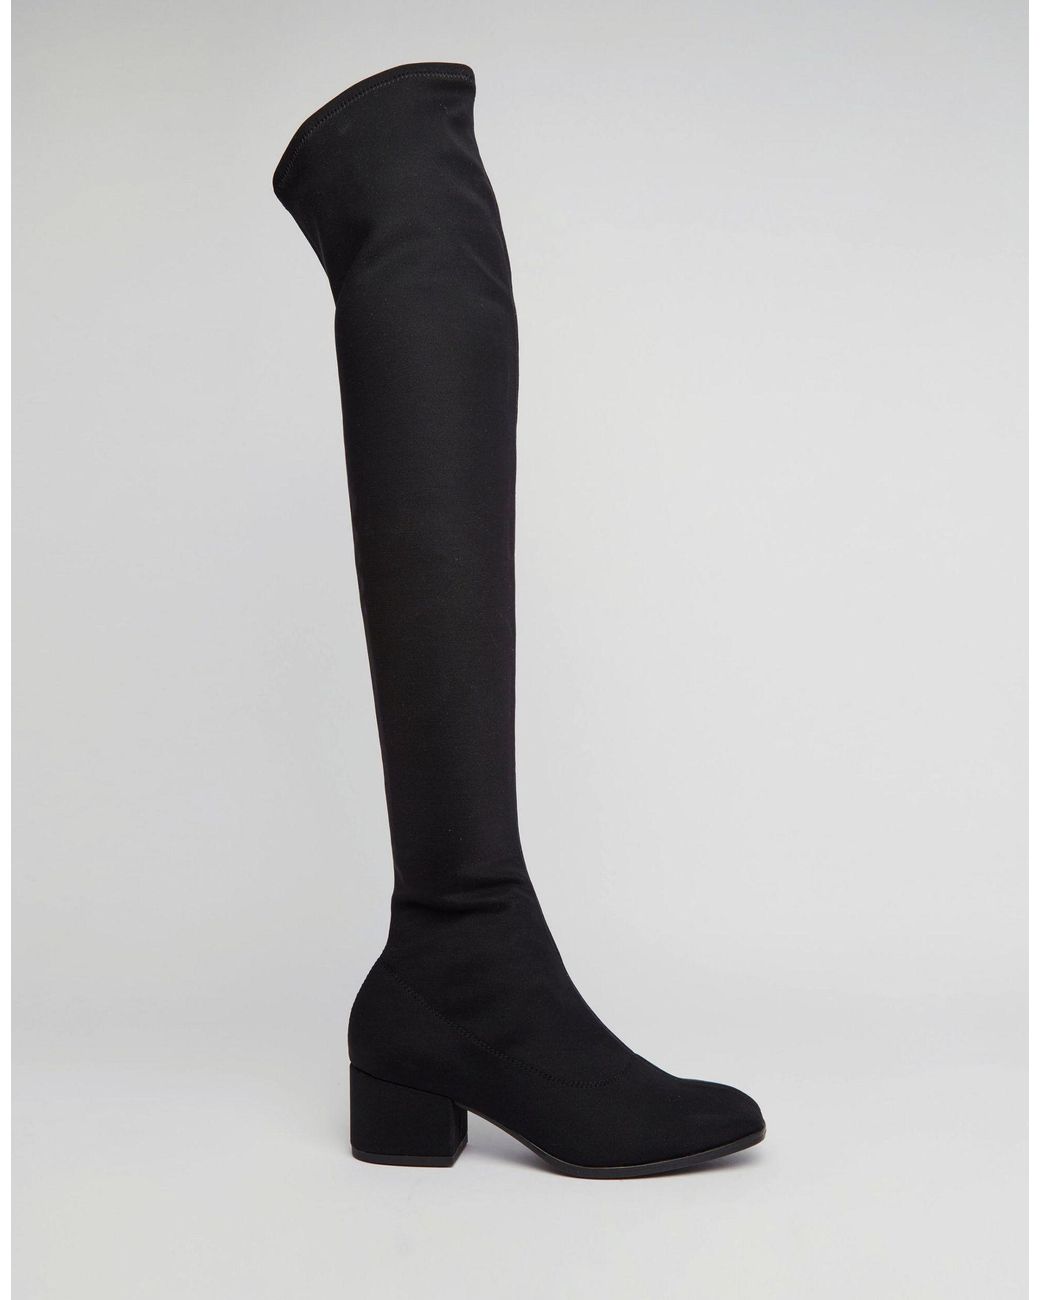 Vagabond Shoemakers Daisy Over The Knee Boots - Black Textile | Lyst